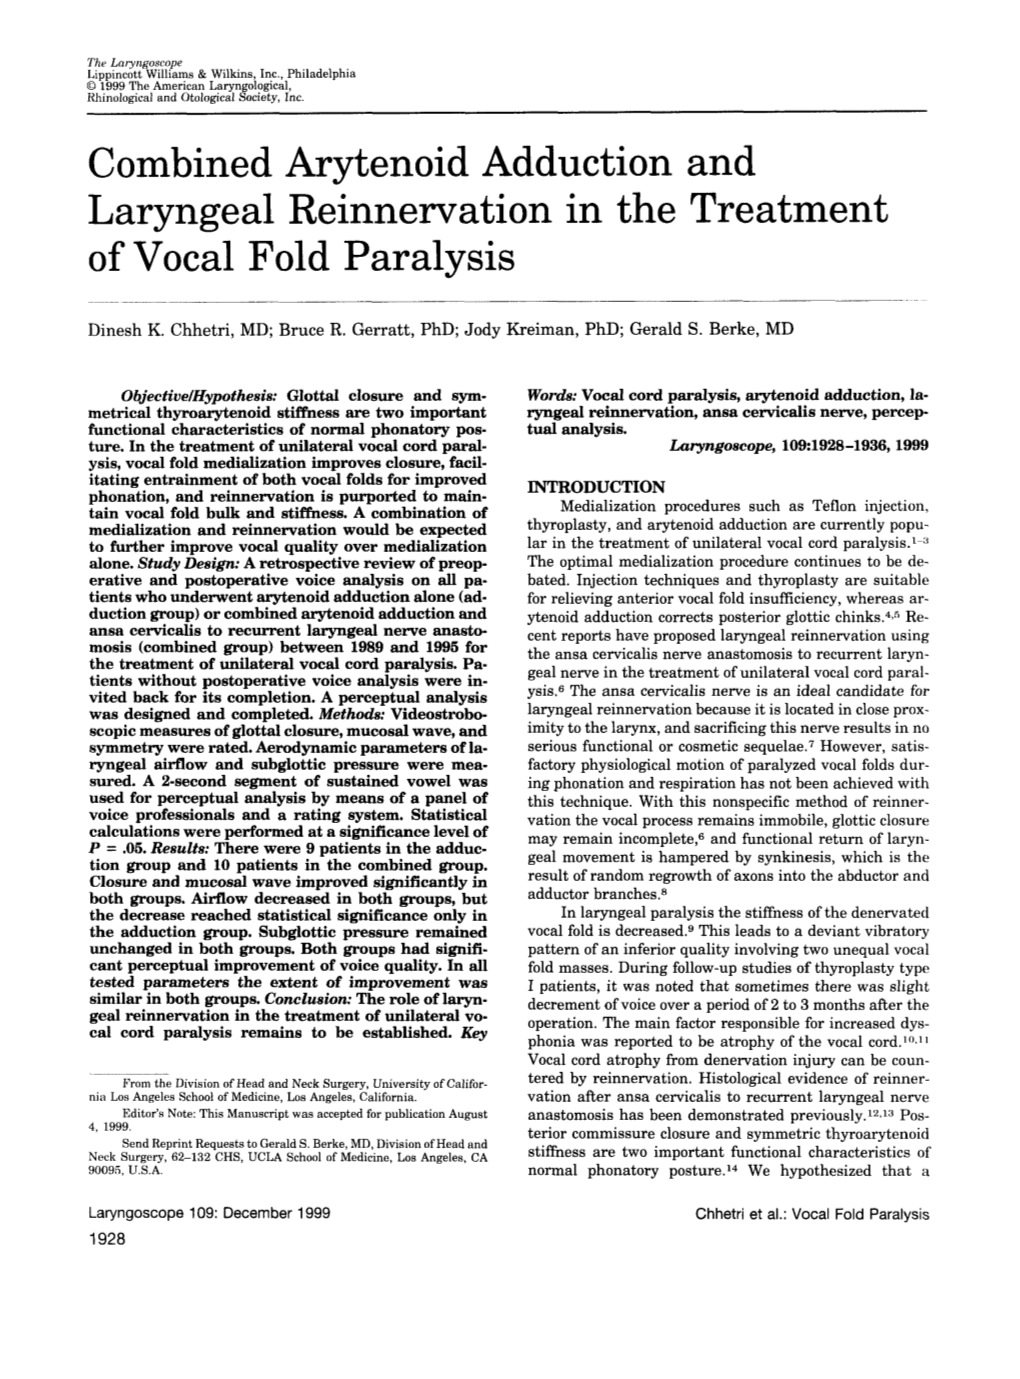 Combined Arytenoid Adduction and Laryngeal Reinnervation in the Treatment of Vocal Fold Paralysis